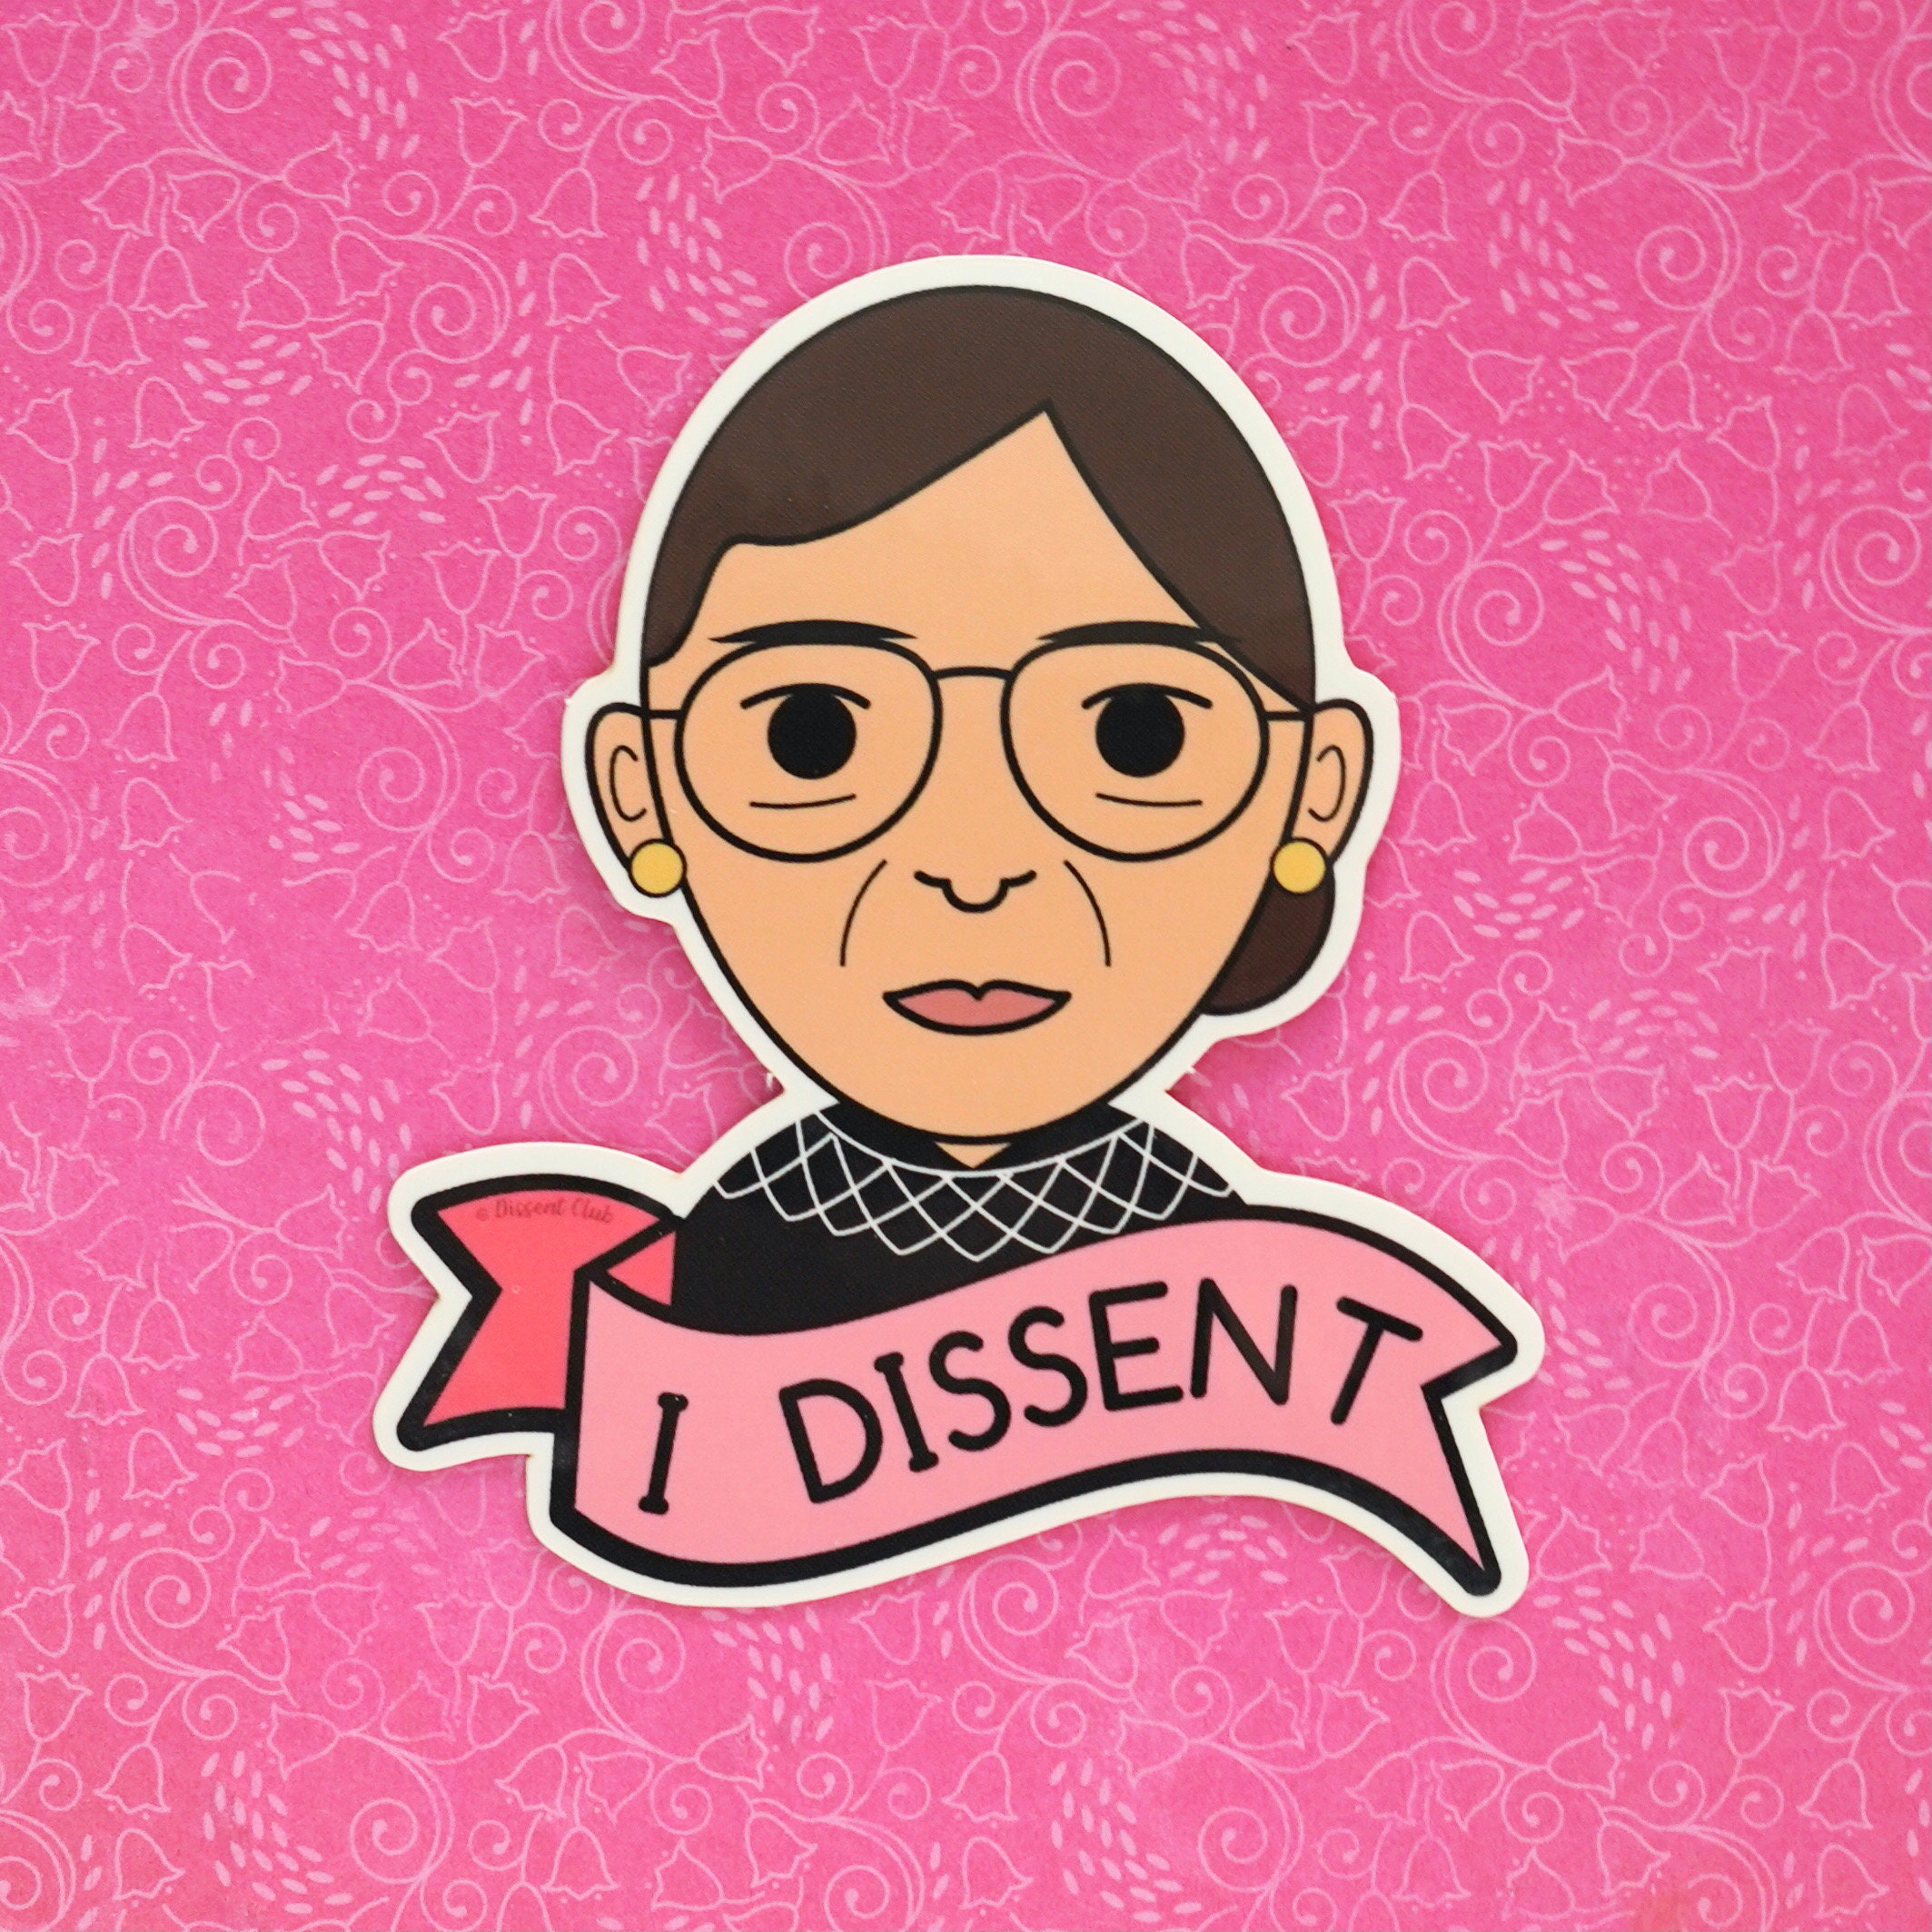 or Wall I Dissent Ruth Bader Ginsburg RBG Sticker Decal for Laptop Car 